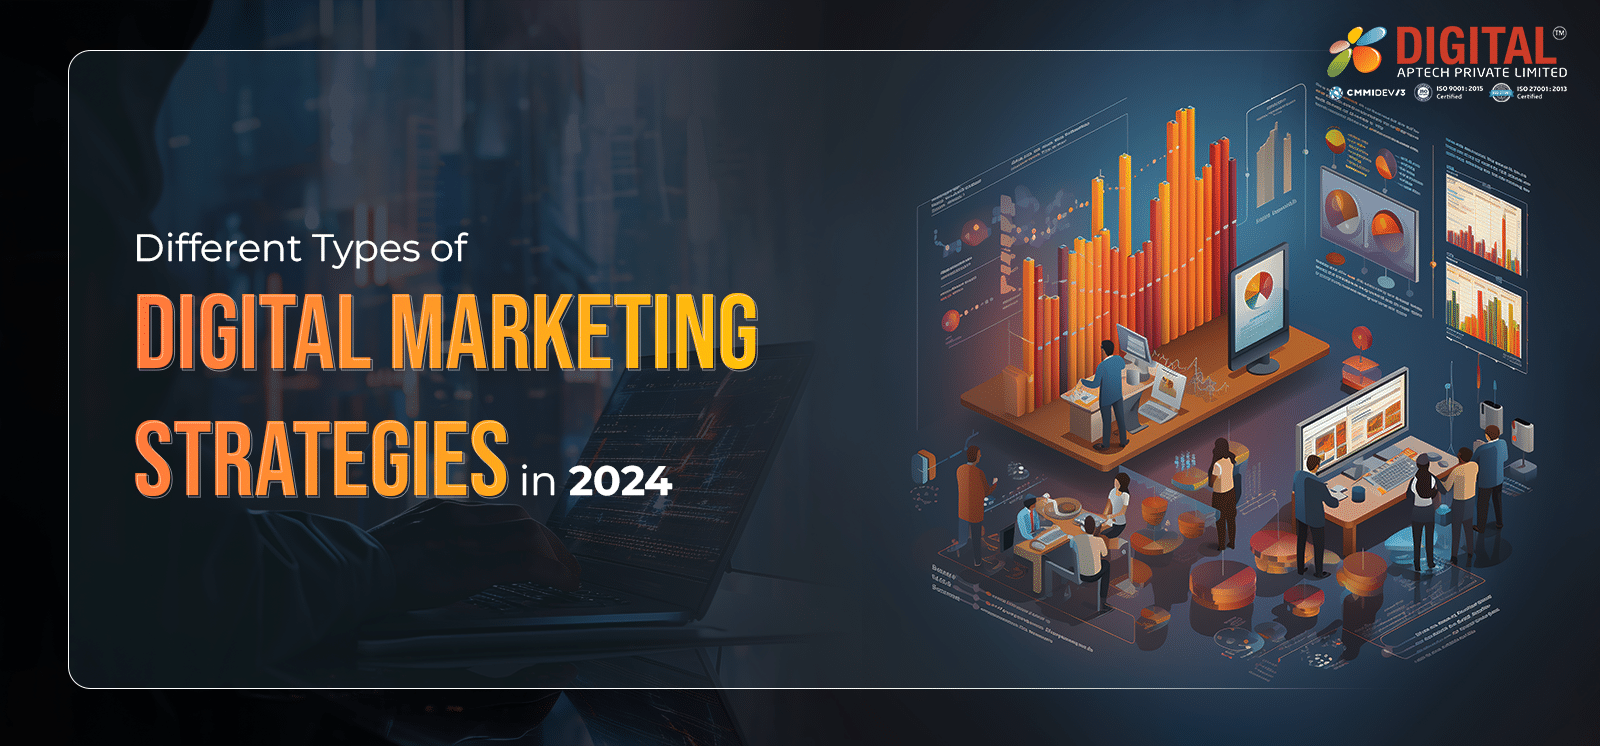 Different Types of Digital Marketing Strategies in 2024